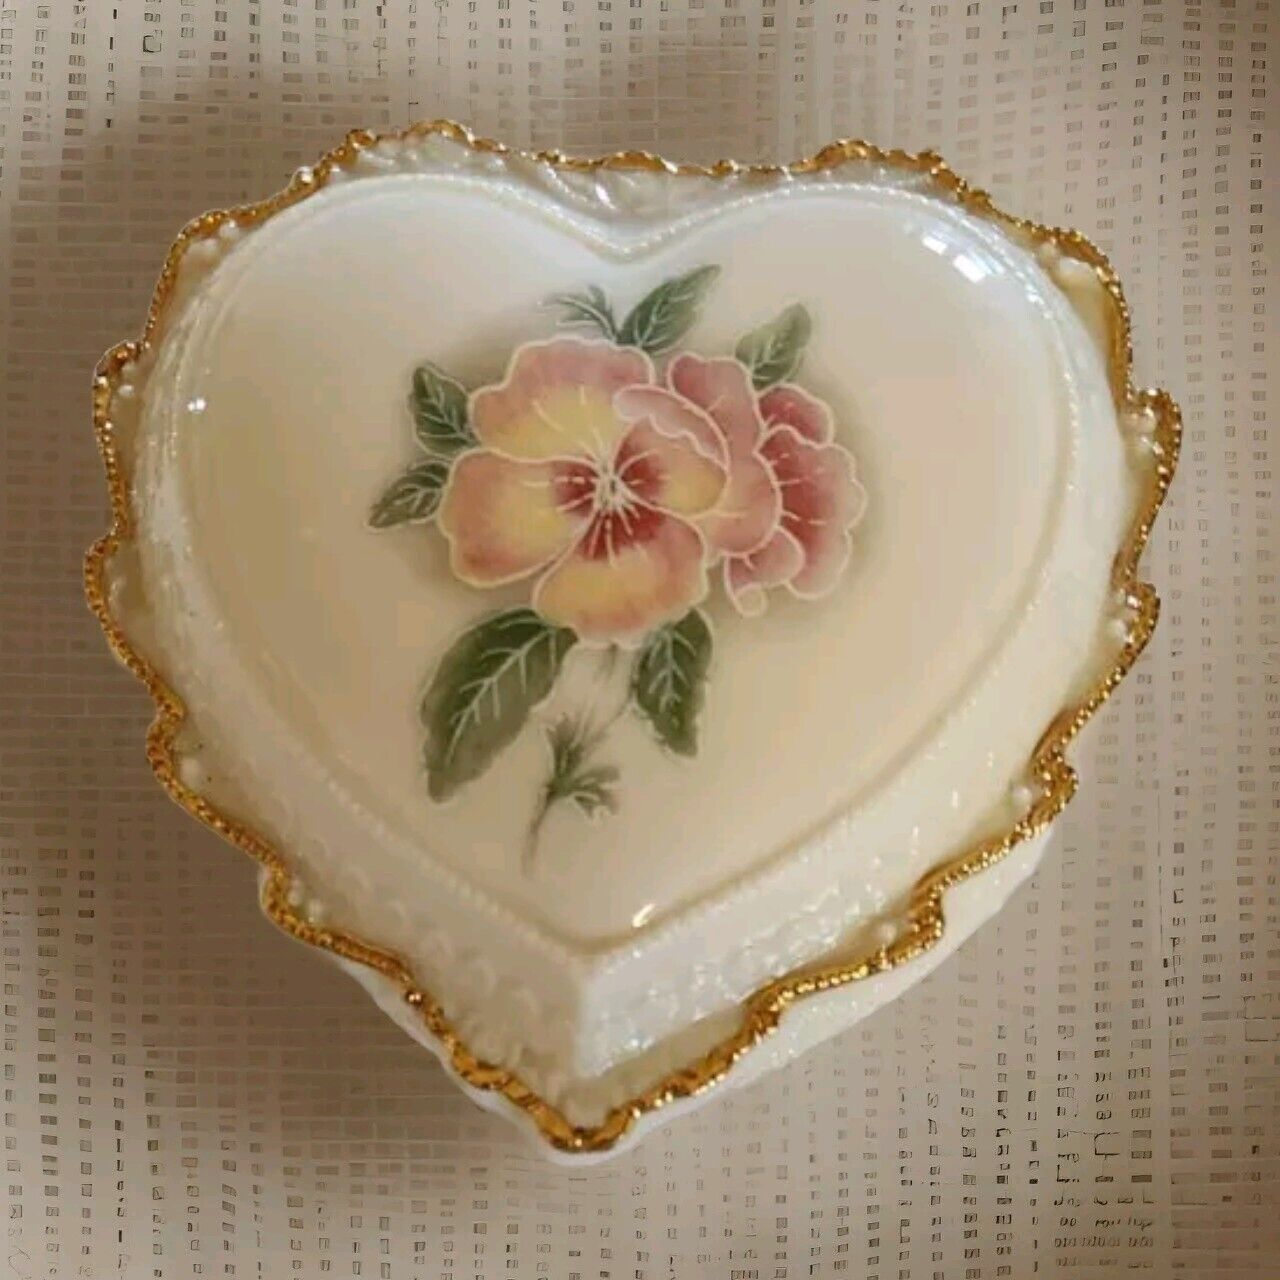 Heart Shaped Porcelain  Musical Trinket Box Plays “Oh What A Beautiful Morning”